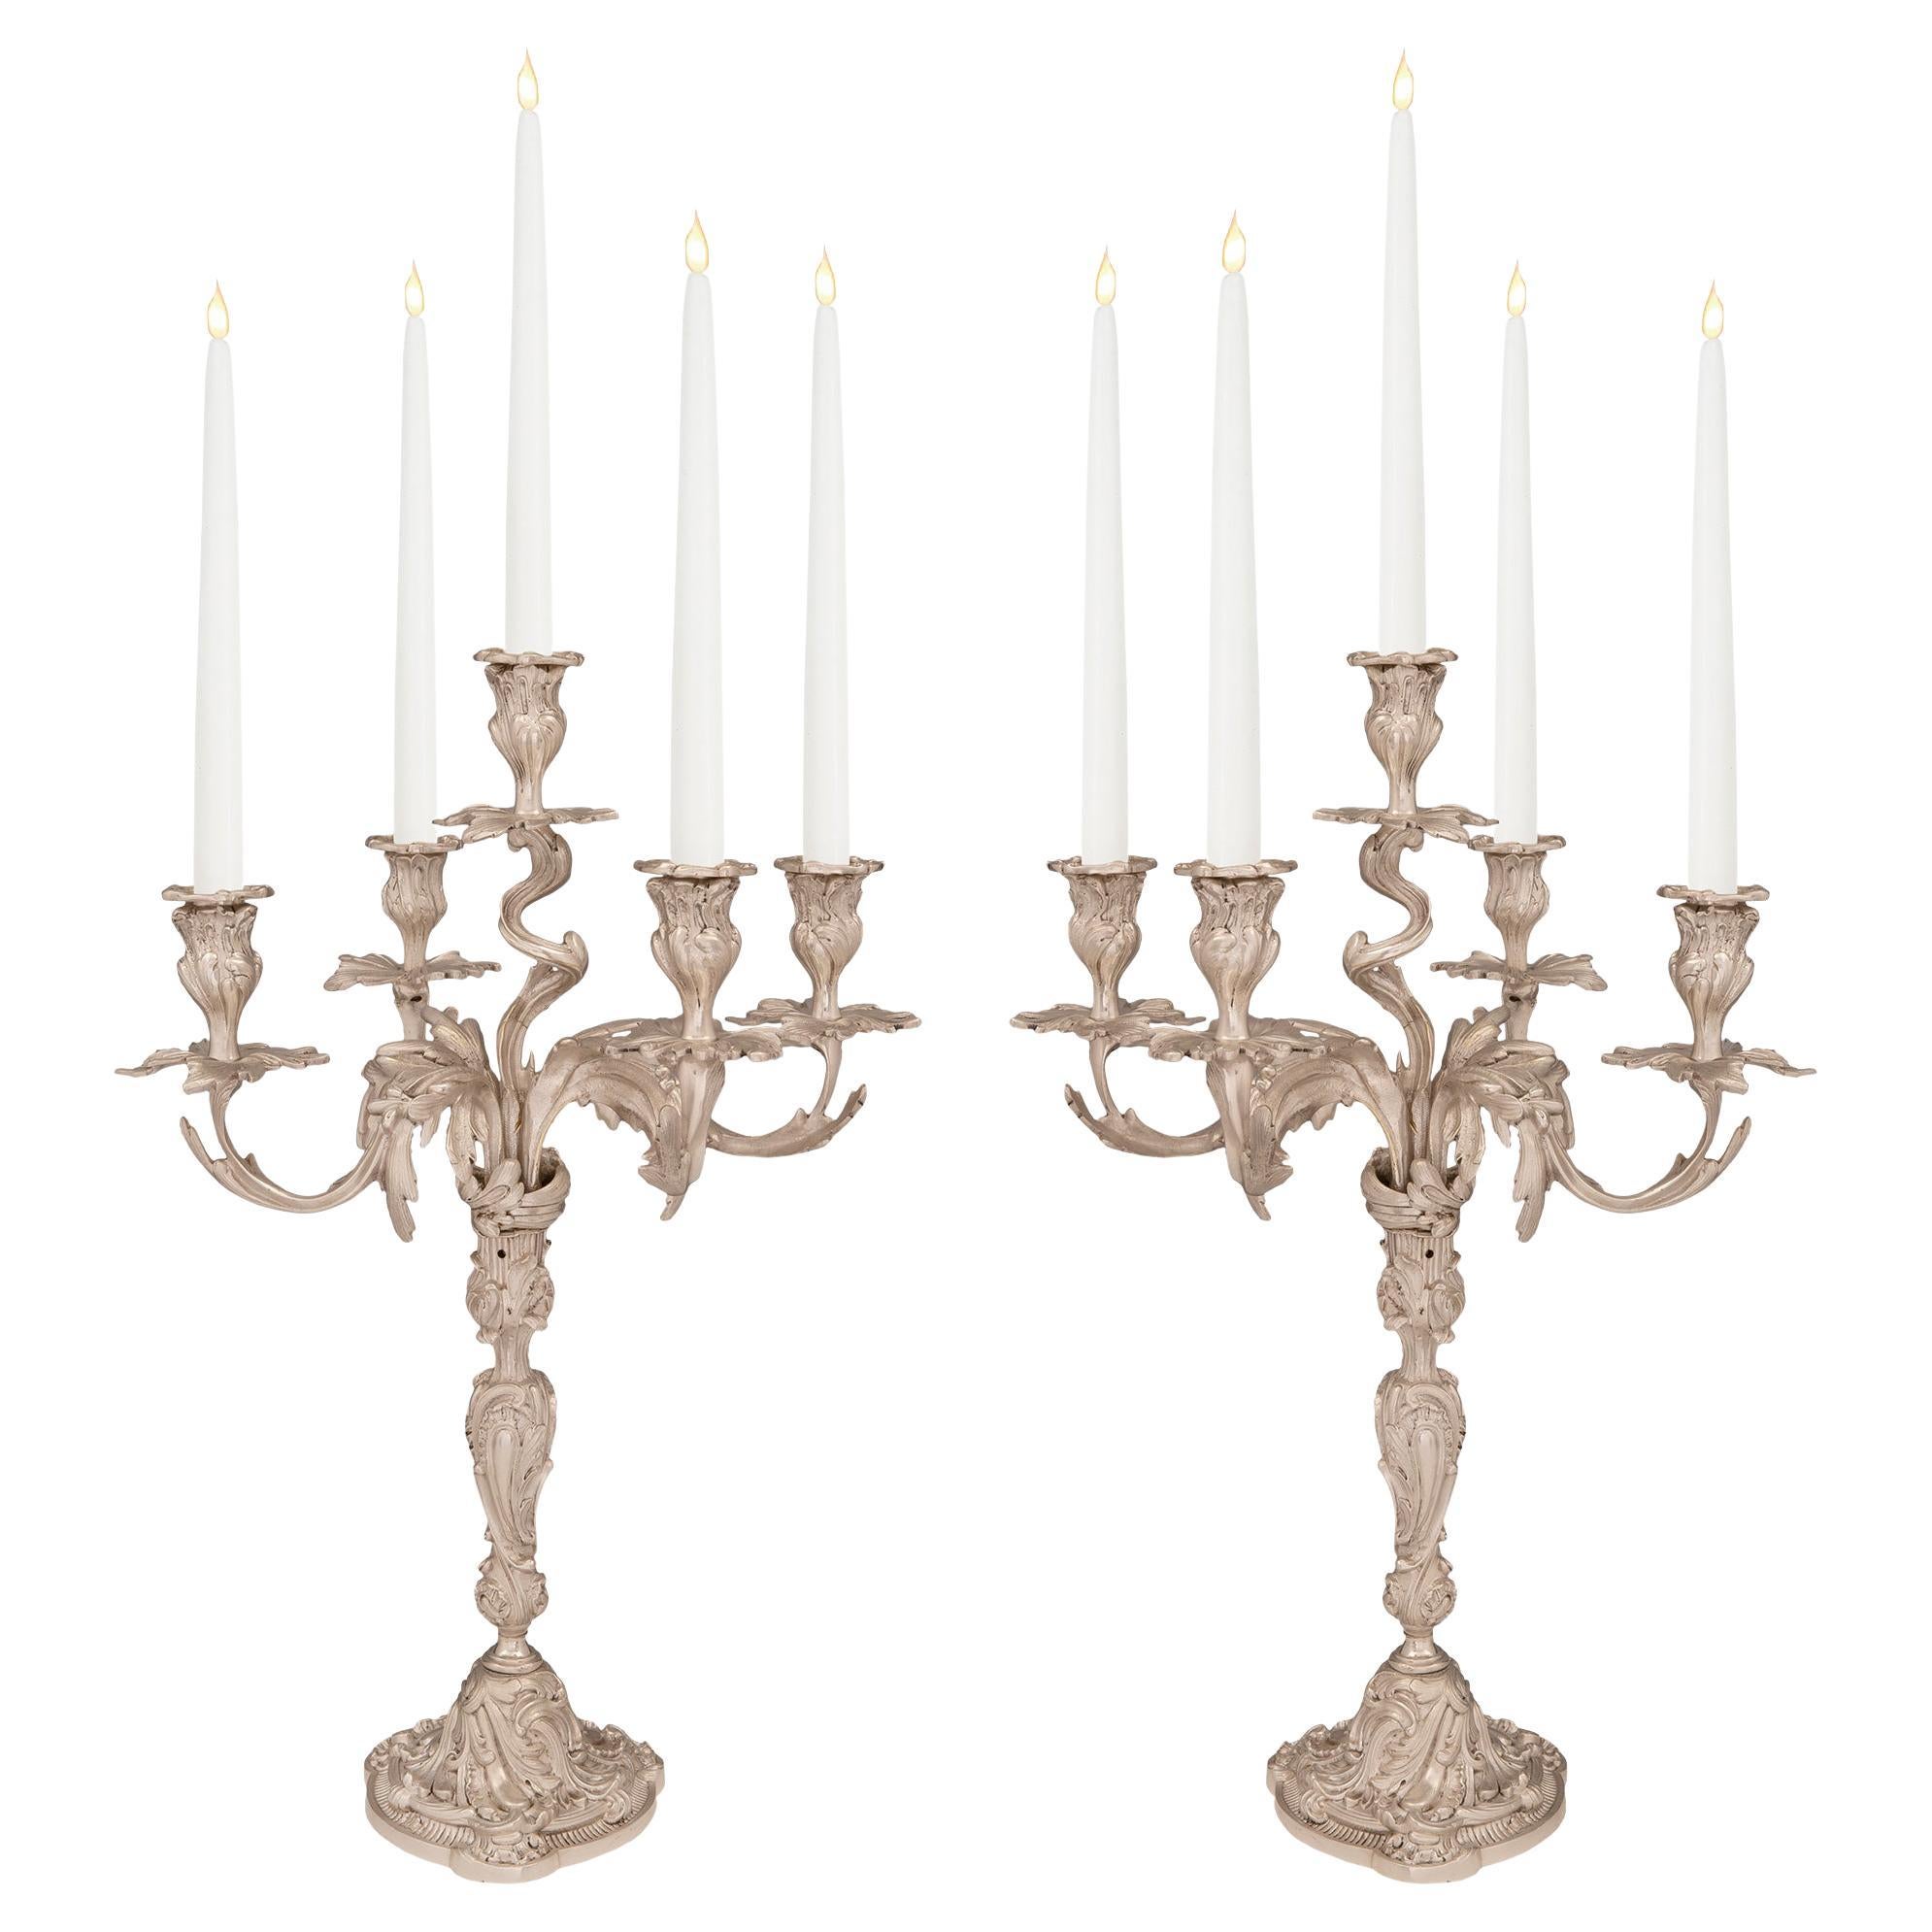 Pair of French Mid-19th Century Louis XV Style Bronze Five-Arm Candelabras For Sale